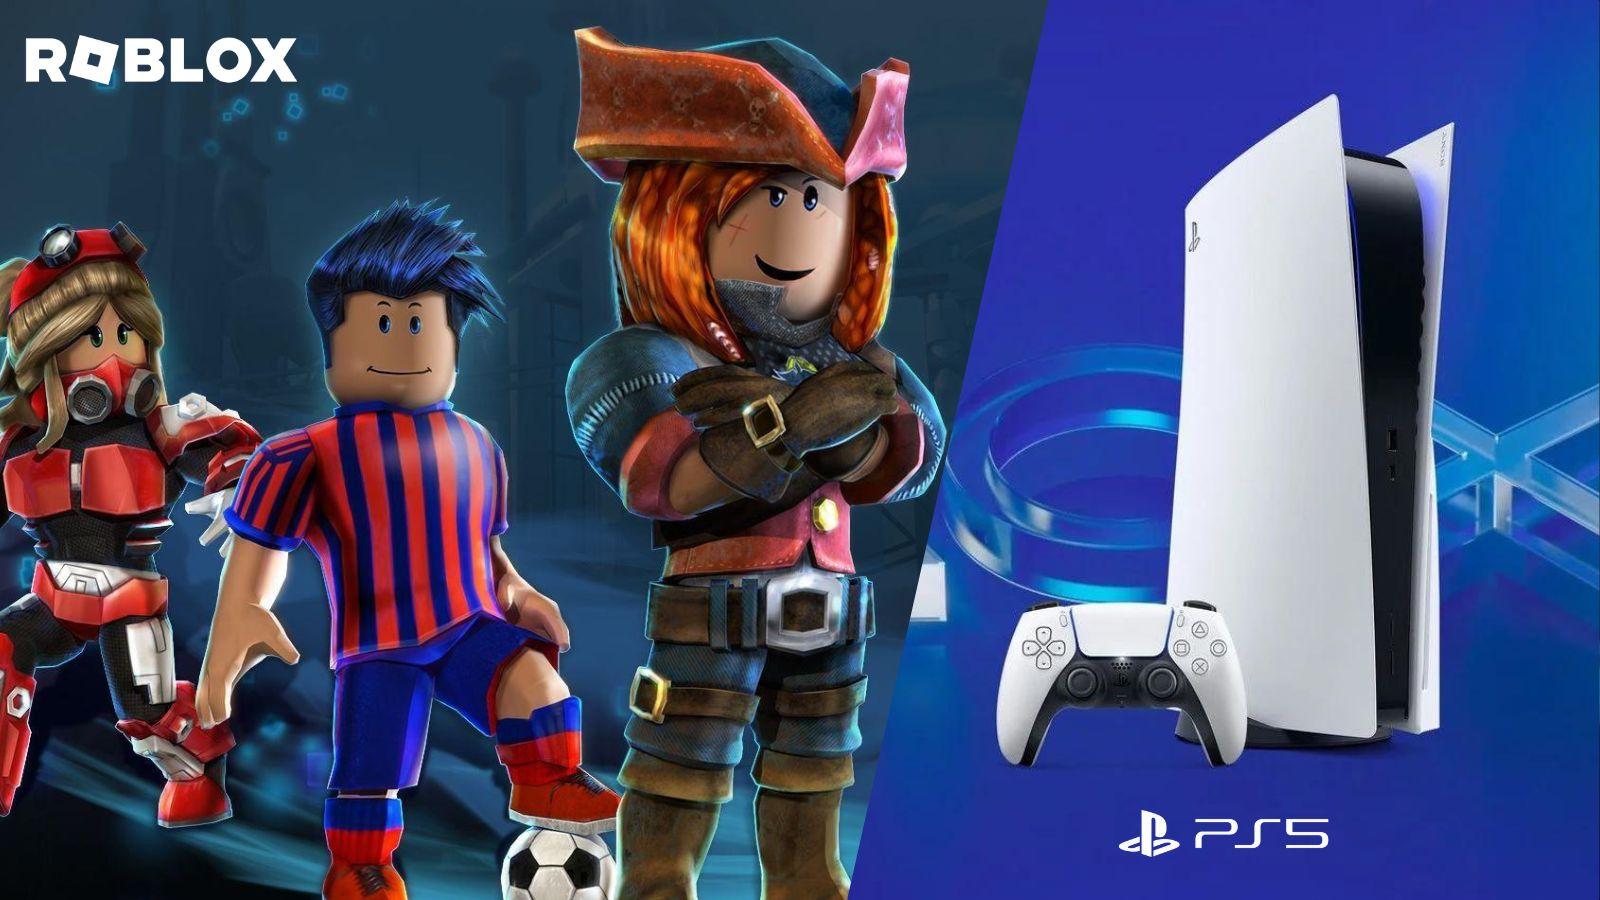 Sony wants Roblox on PlayStation despite “child safety concerns” - Dexerto